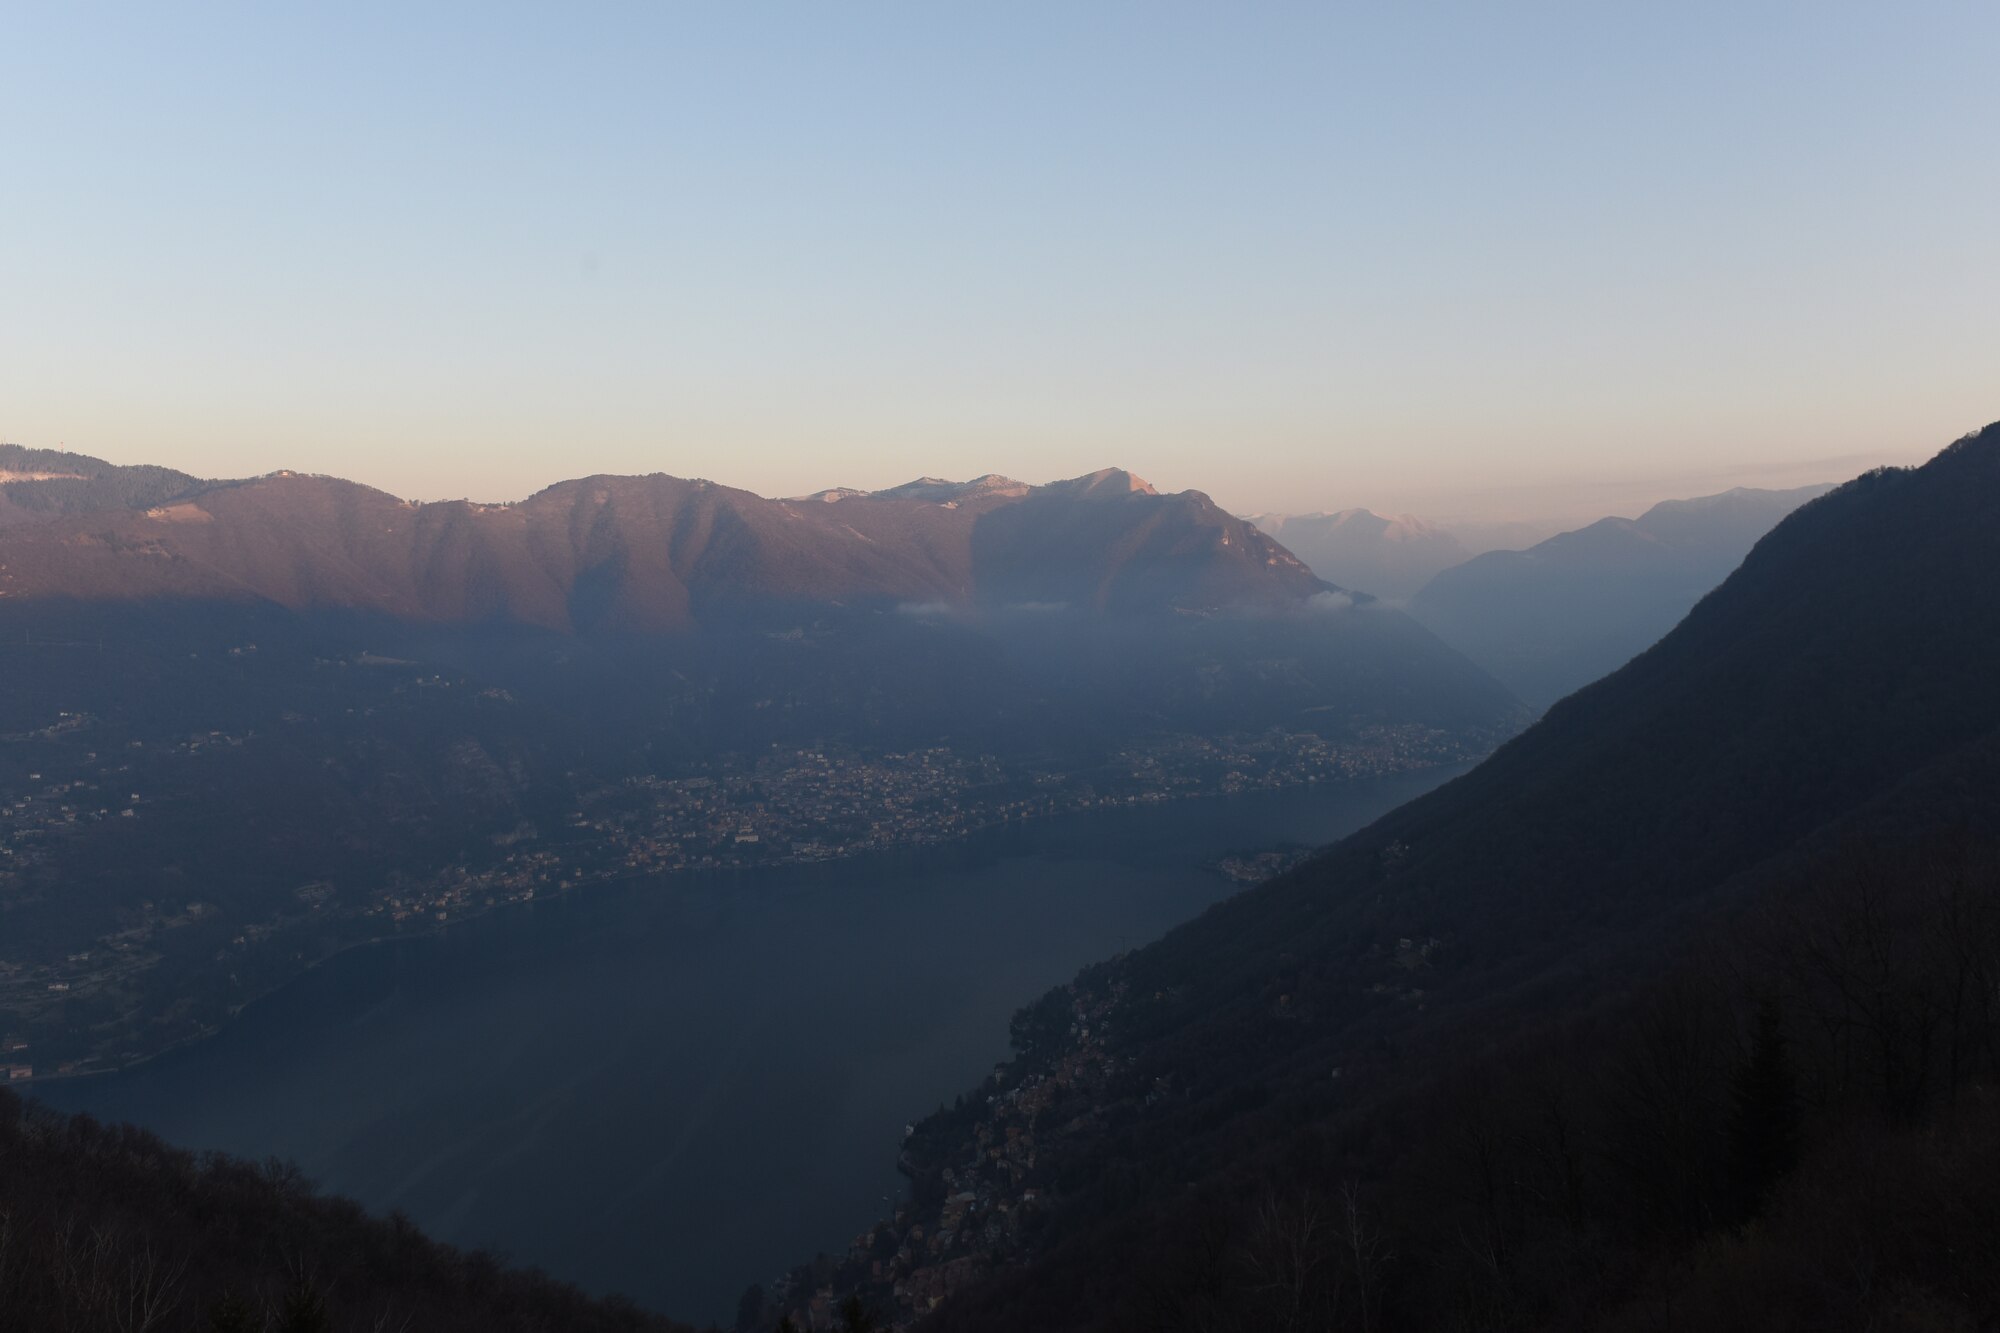 The sun begins to rise over Lake Como, Italy, Jan. 20, 2019. Lake Como is in Northern Italy’s Lombardy region, set against the foothills of the Alps. (U.S. Air Force photo by Airman 1st Class Madeline Herzog)